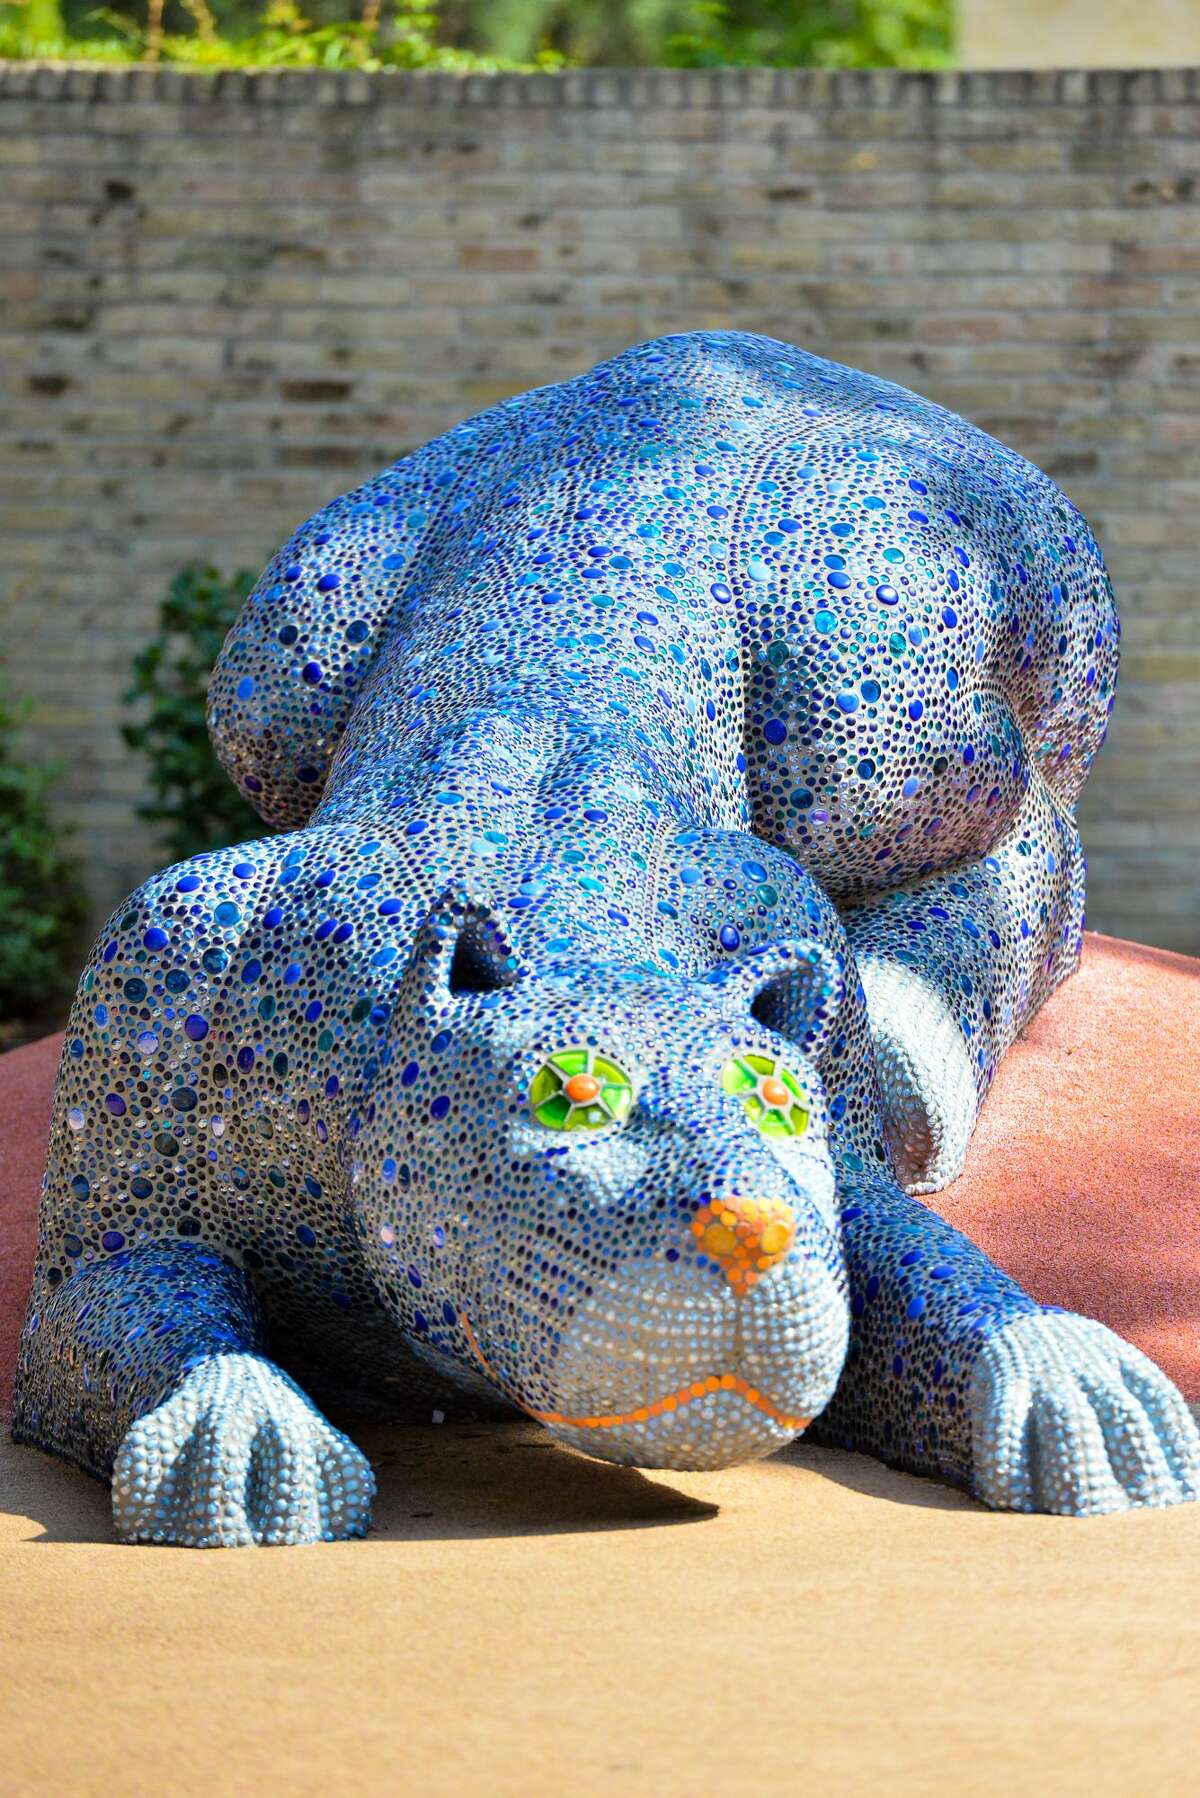 The blue panther that artist Oscar Alvarado created for Yanaguana Garden at Hemisfair is among his best-known works.